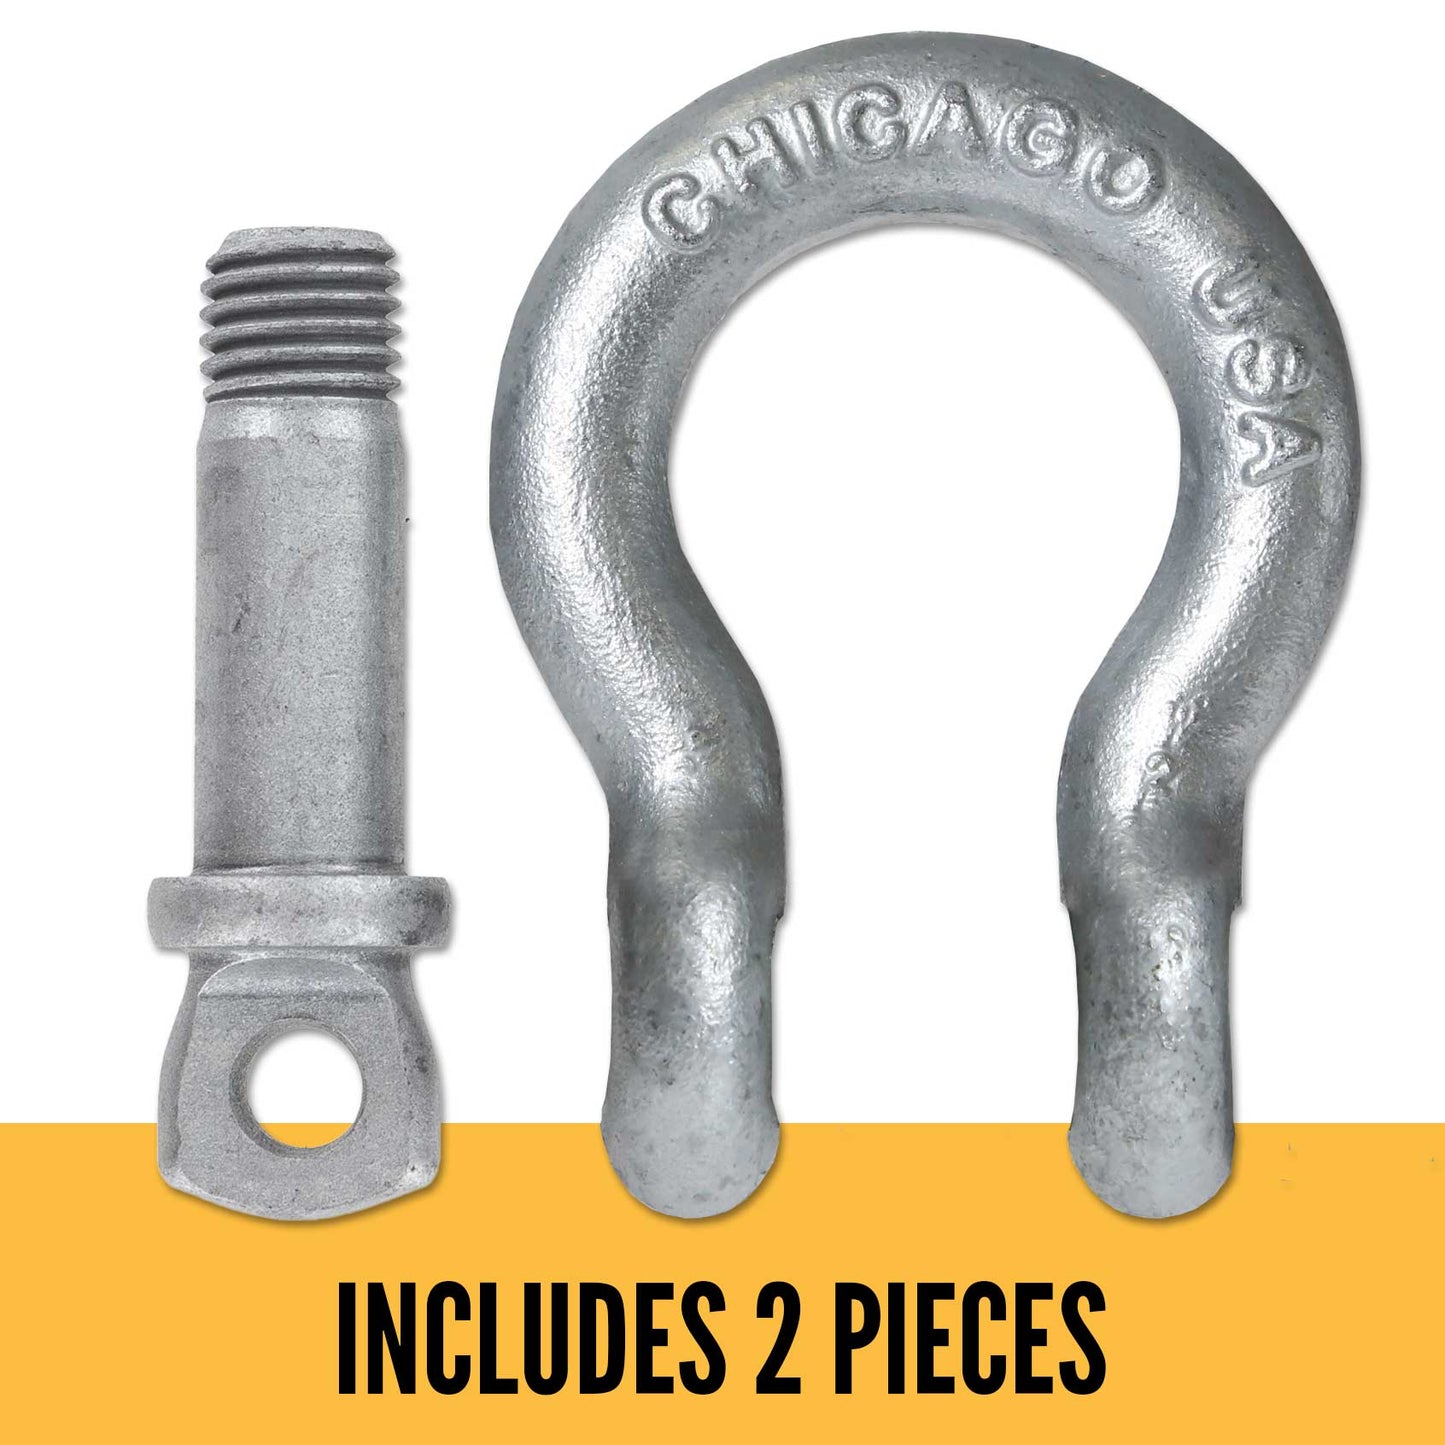 Screw Pin Anchor Shackle - Chicago Hardware - 1-1/4" Galvanized Steel - 12 Ton parts of a shackle